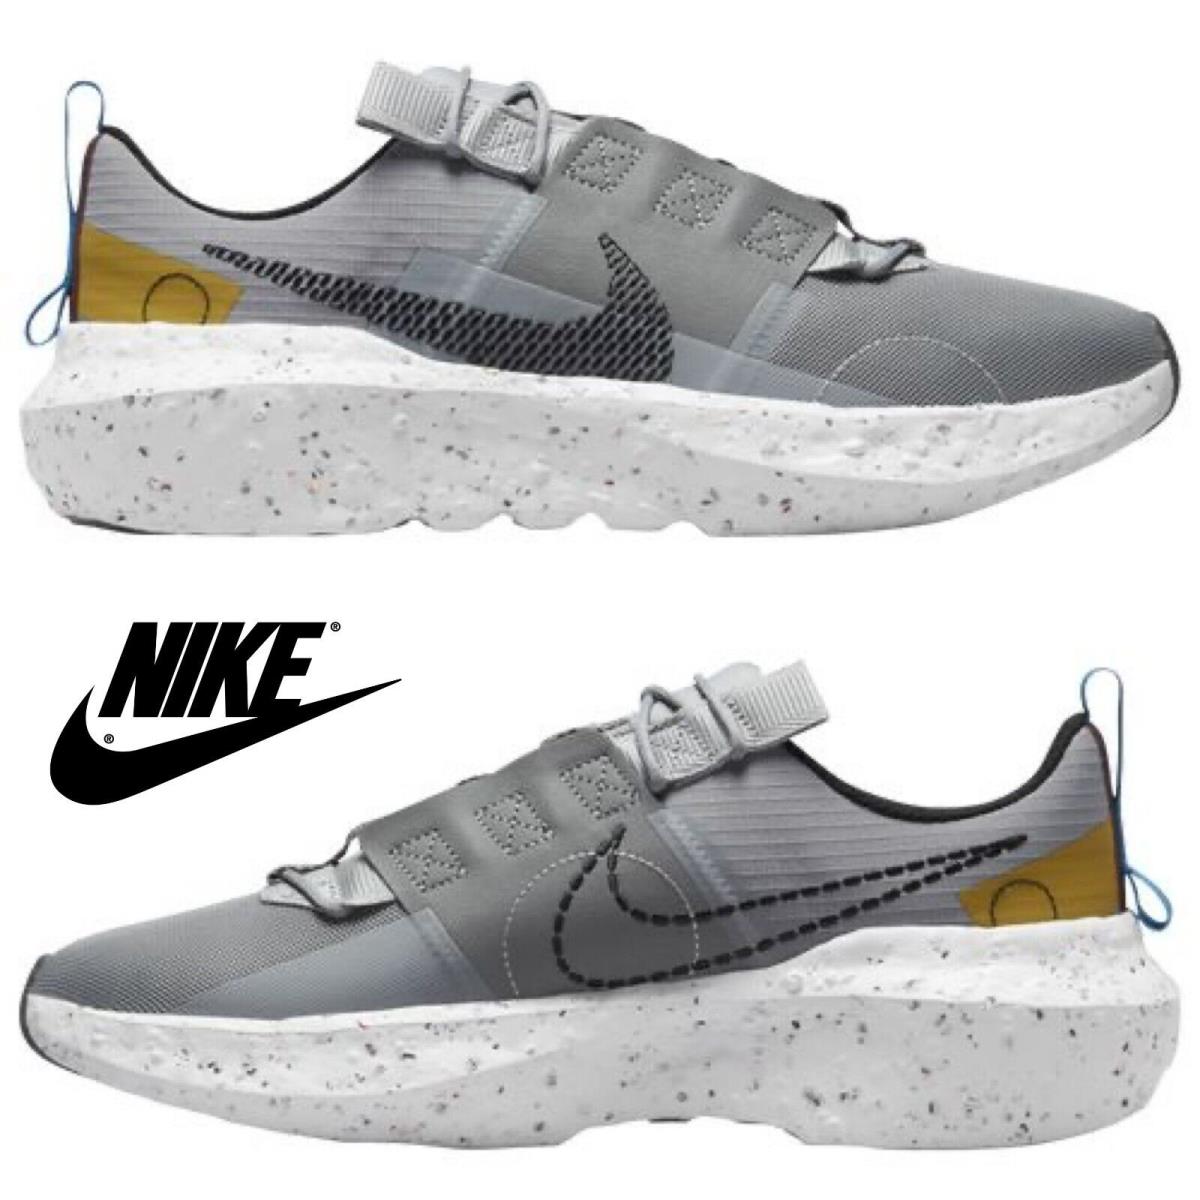 Nike Men`s Crater Impact Sneakers Training Athletic Sport Casual Shoes Gray - Gray , Particle Grey/Black/Lt Smoke Grey Manufacturer